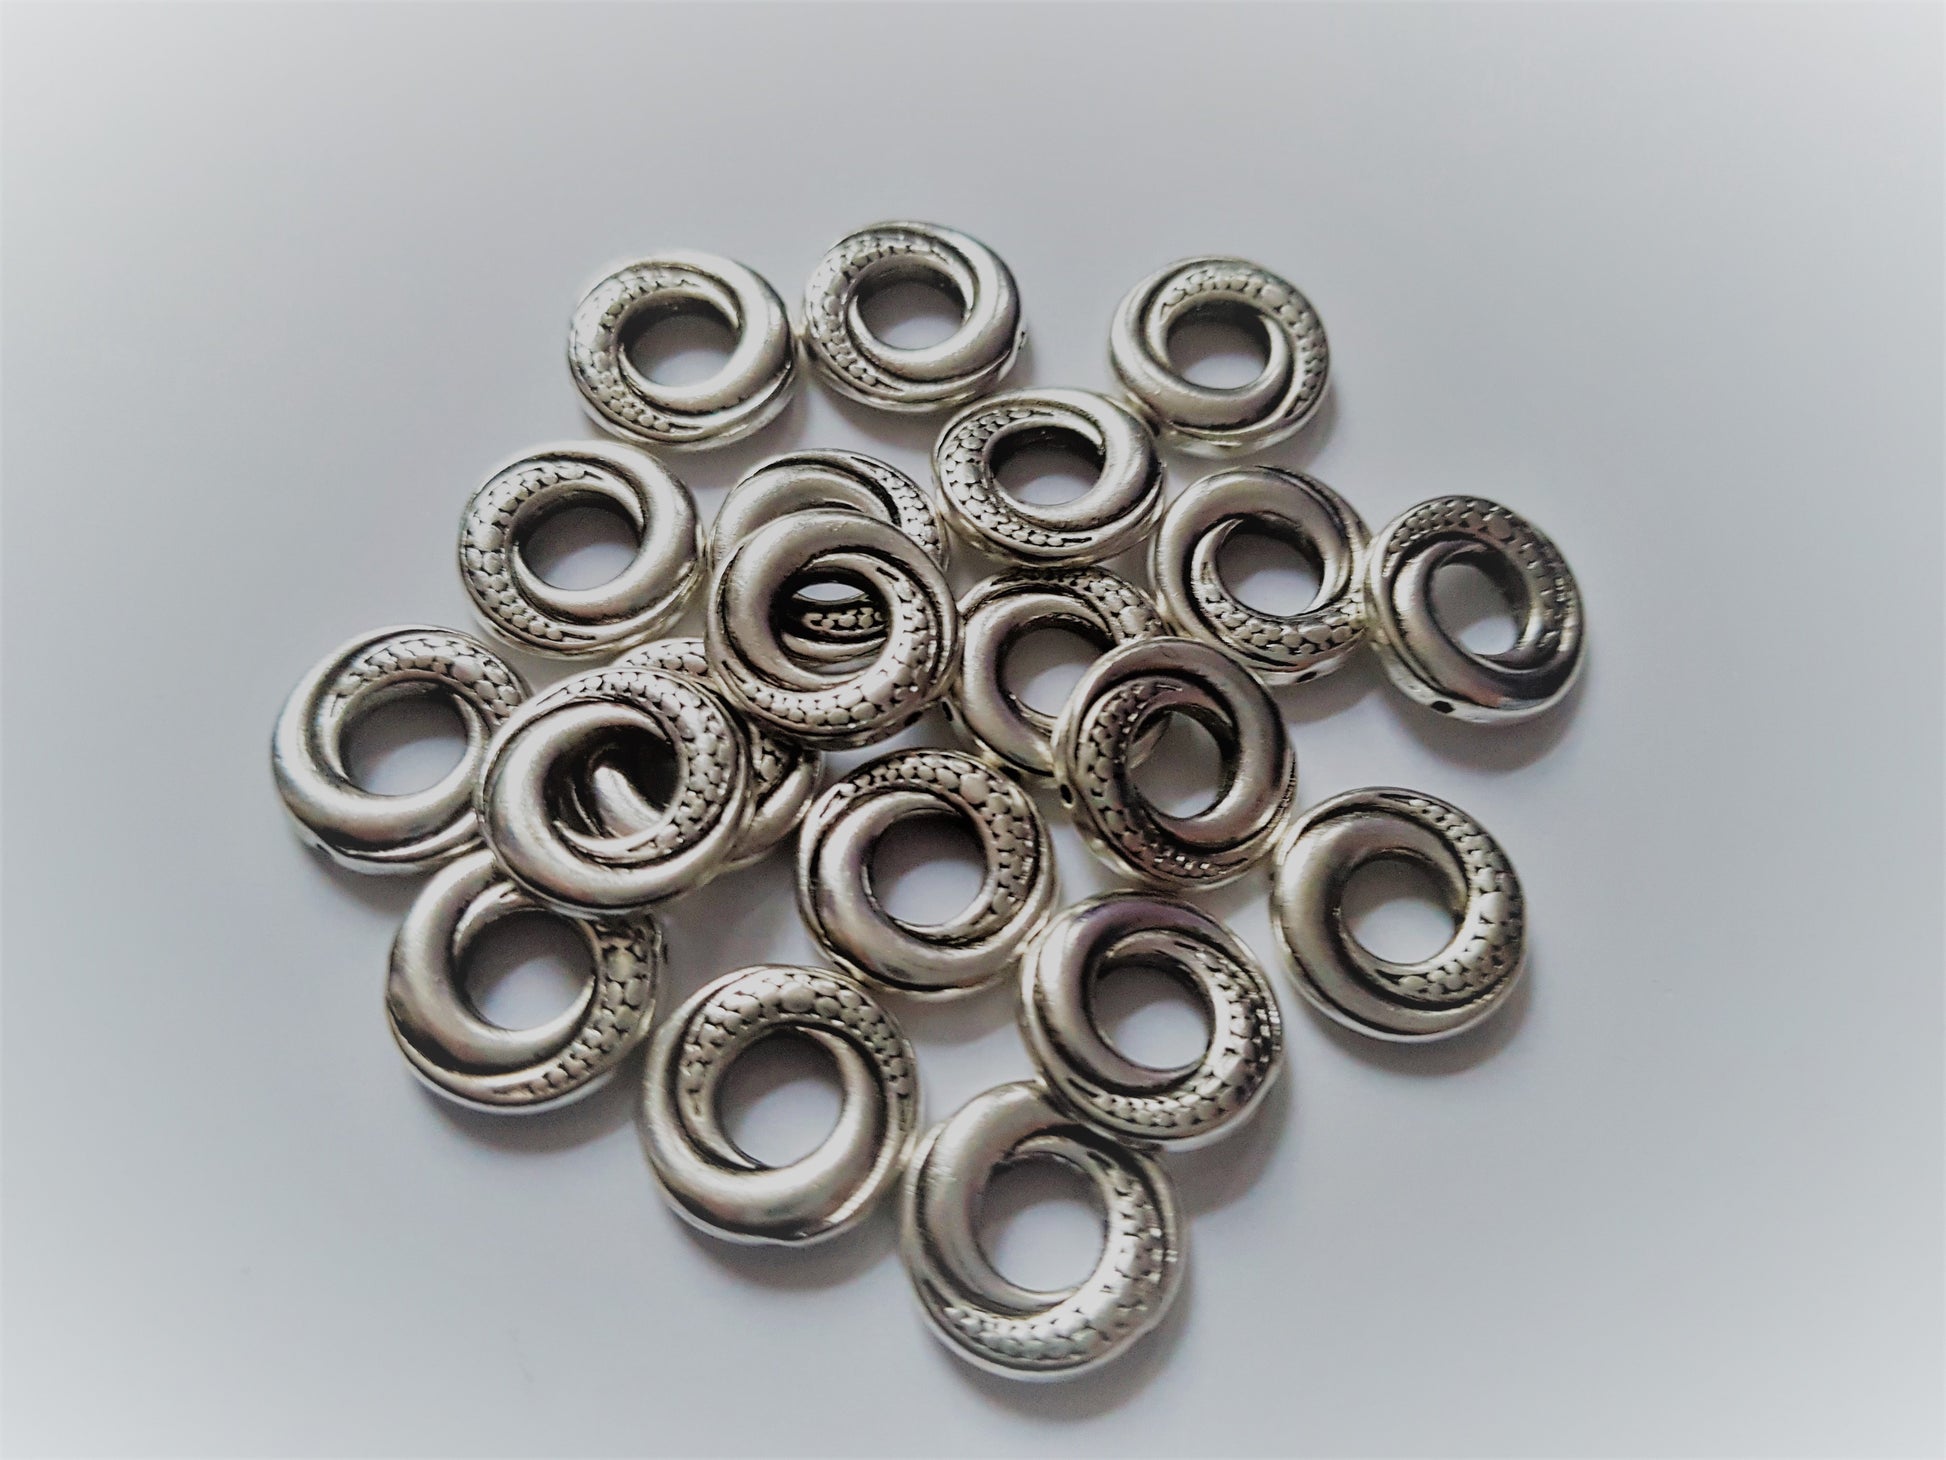 15mm donut ring spacer beads - silver plated